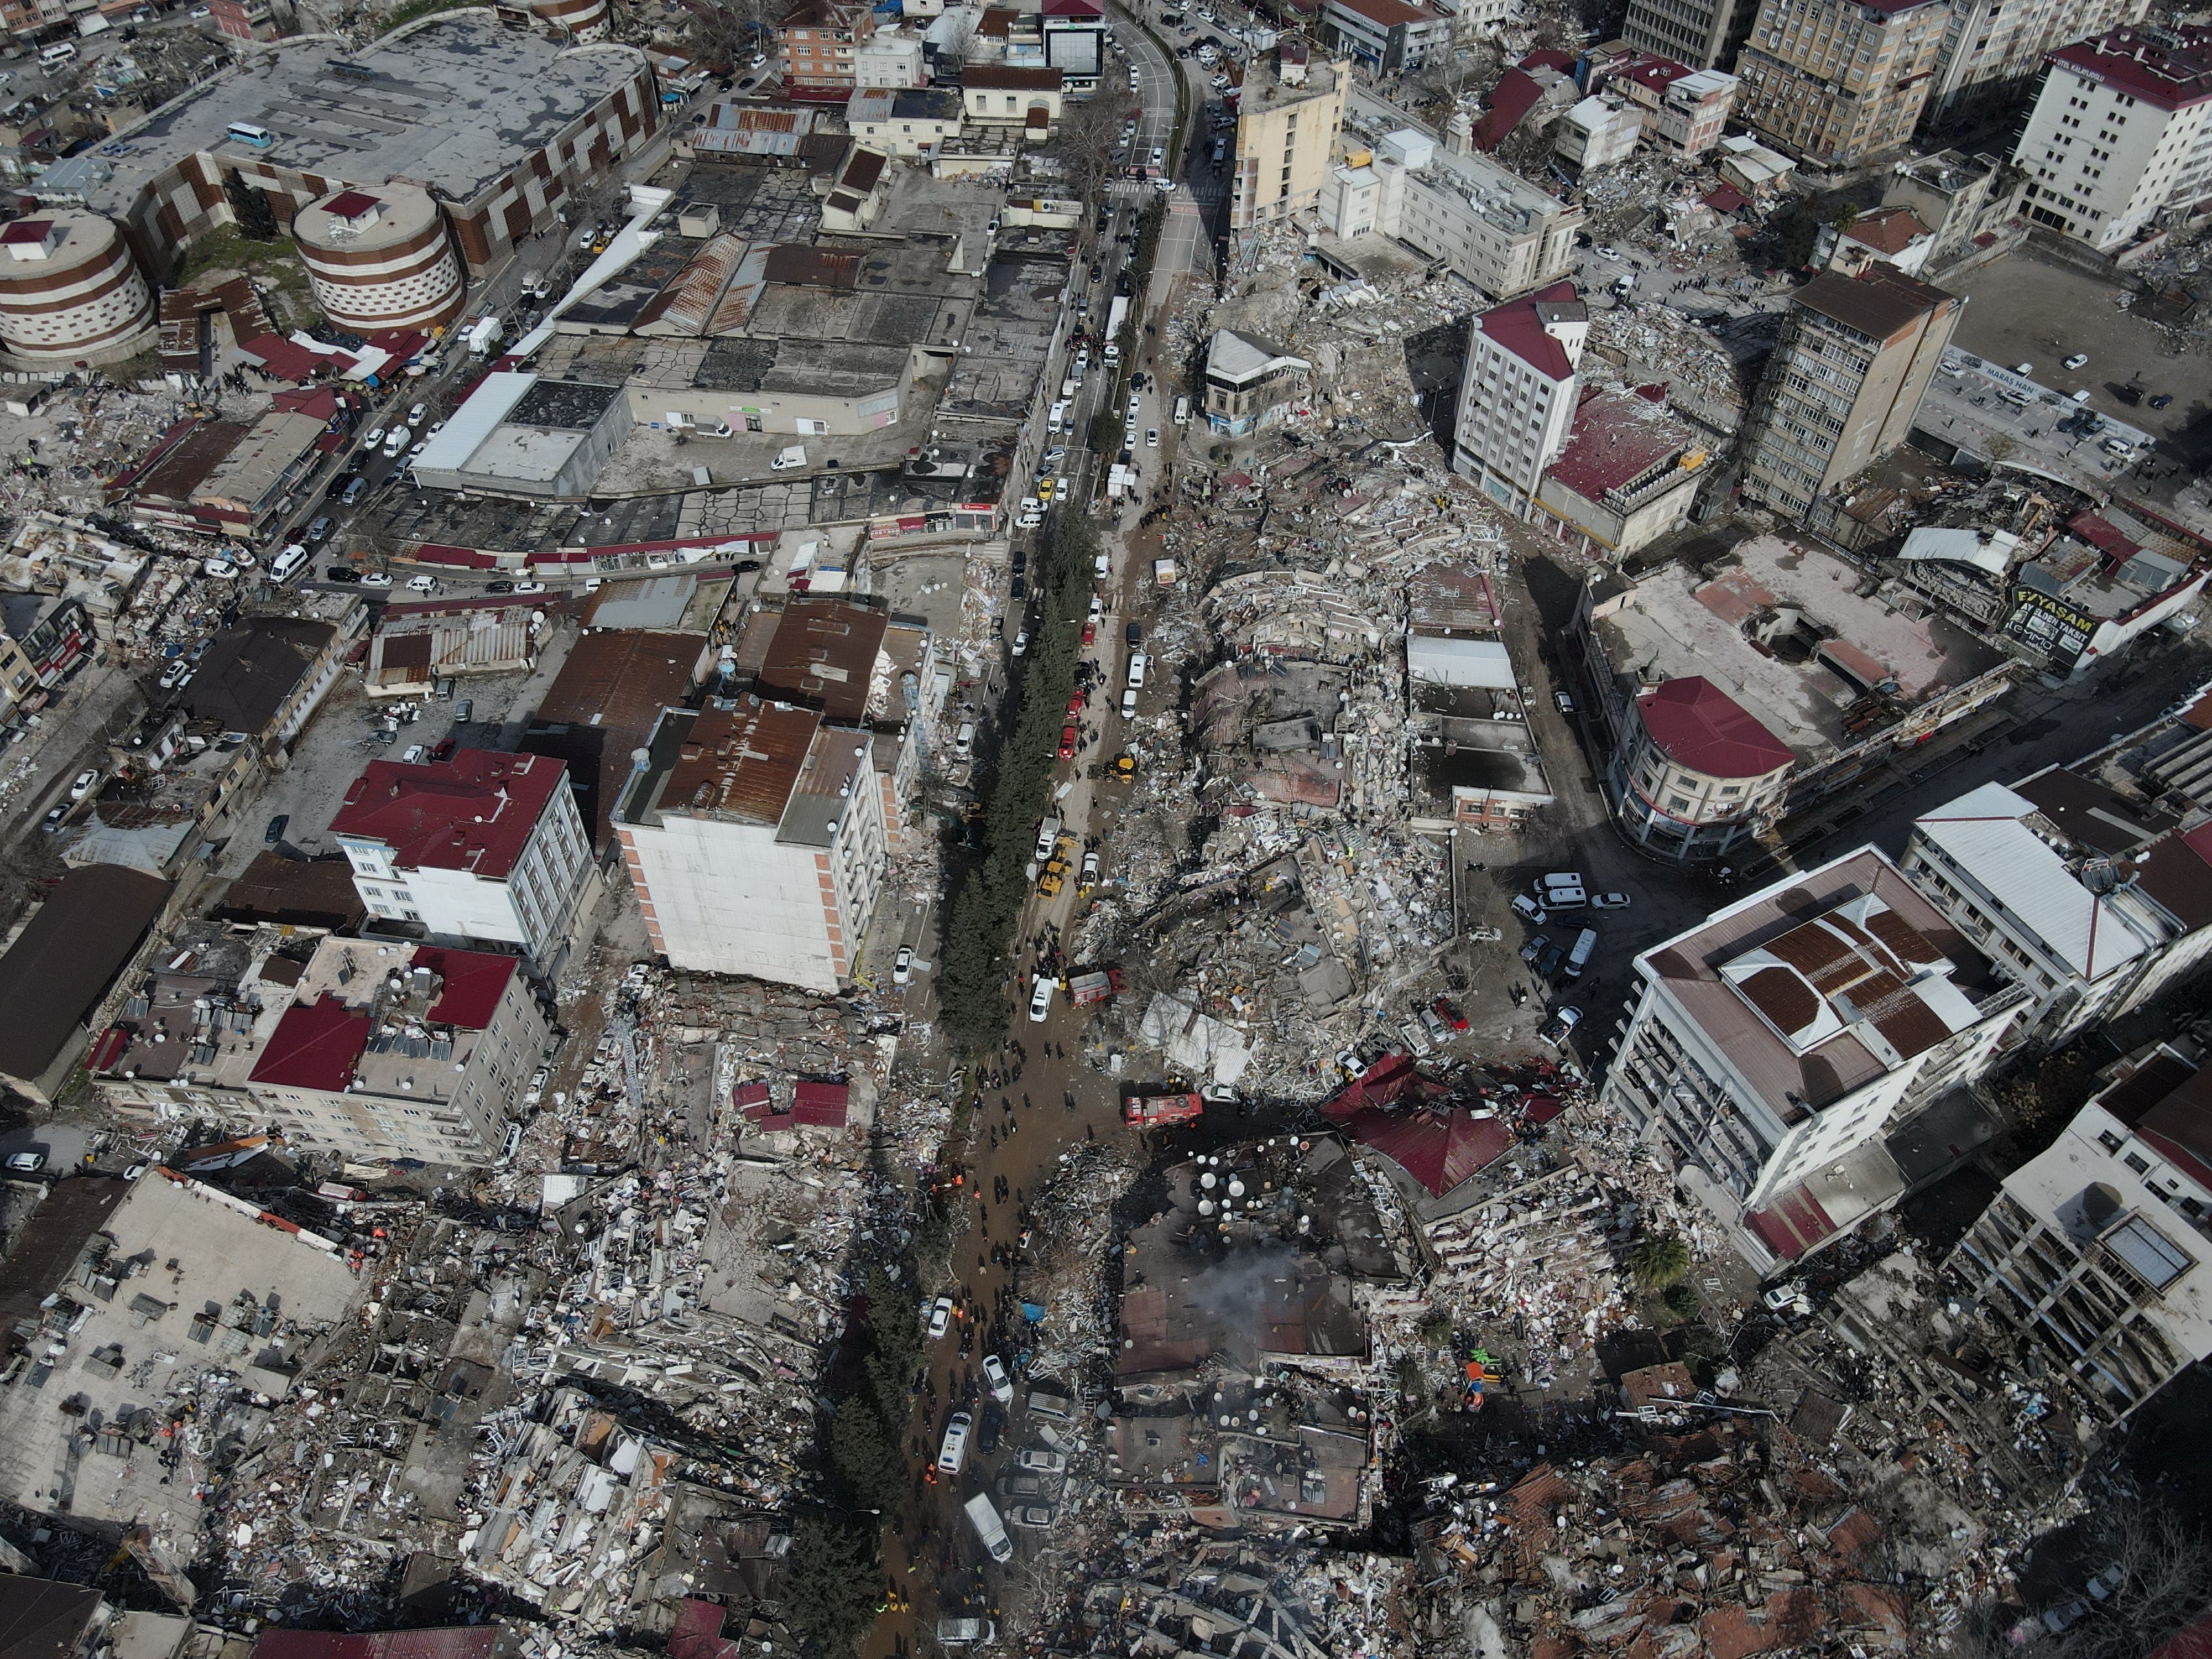 An aerial view shows damaged and collapsed buildings following an earthquake, in Kahramanmaras, Turkey February 7, 2023. REUTERS/Stringer NO RESALES. NO ARCHIVES.